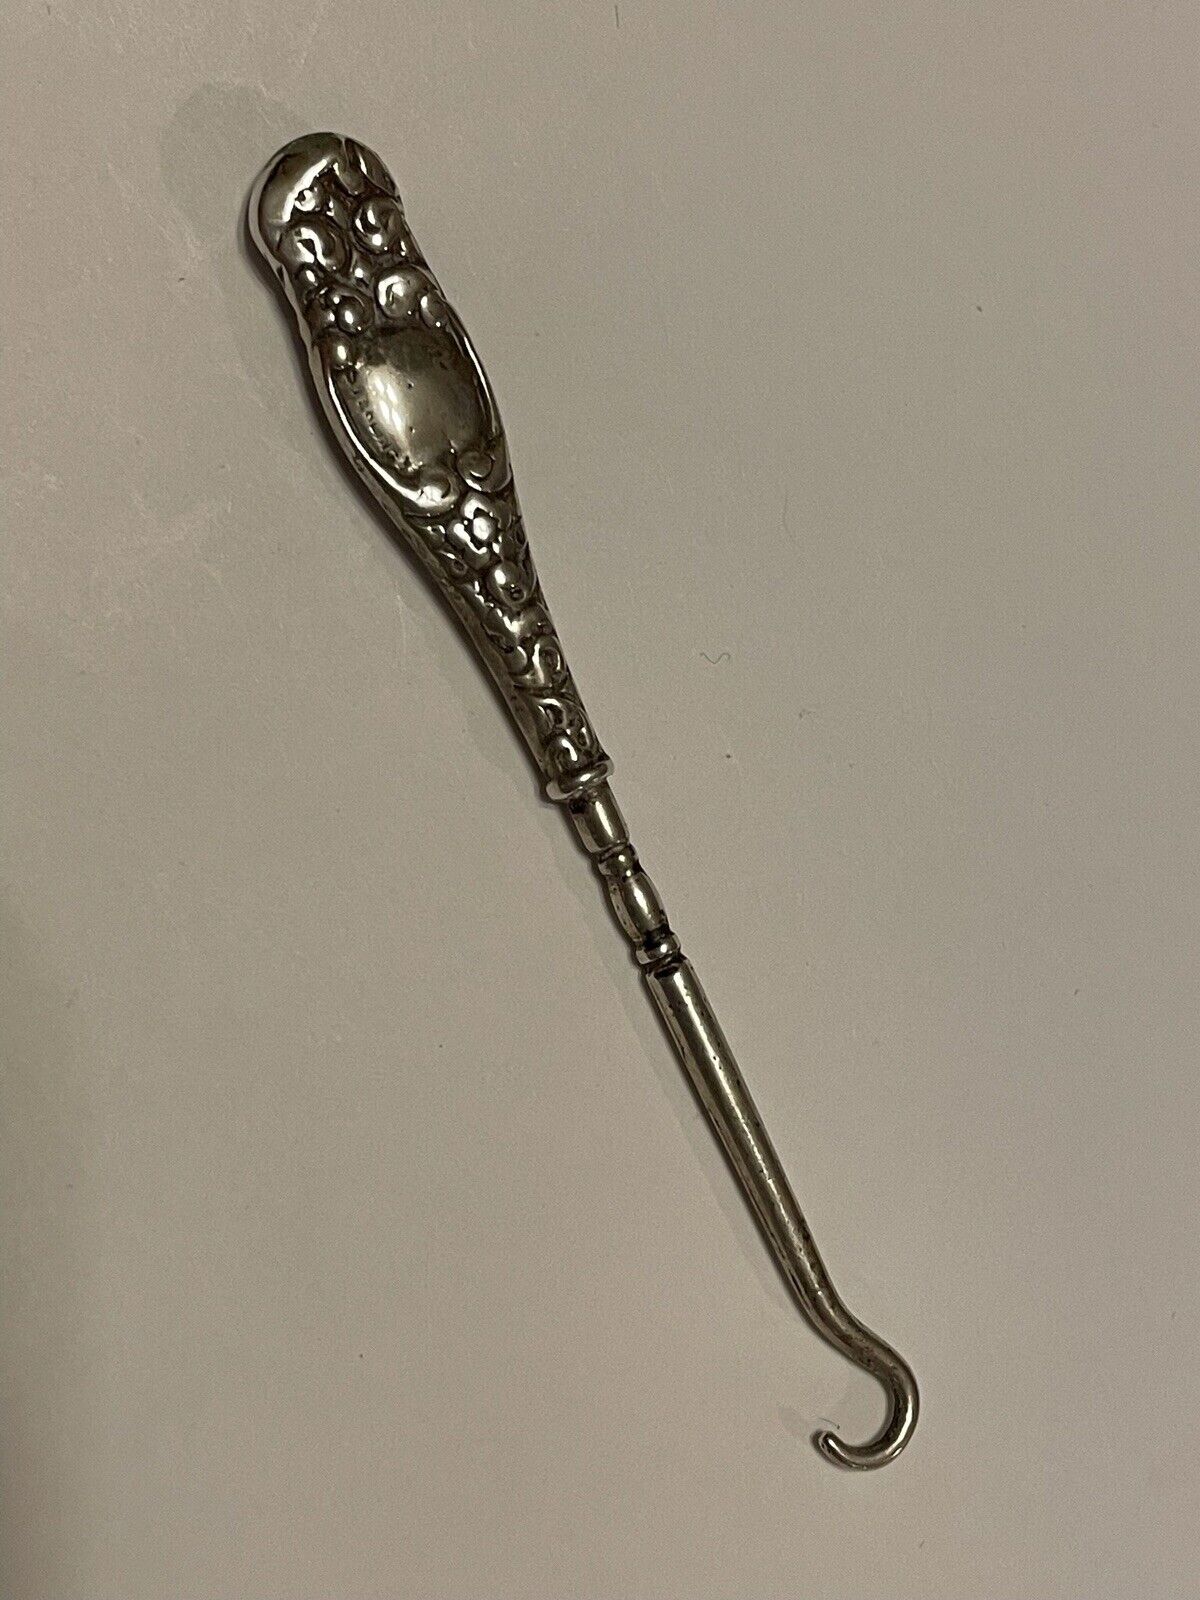 Antique Sterling Silver Glove Shoe Button Hook 3” Vanity Tool Good Condition #4